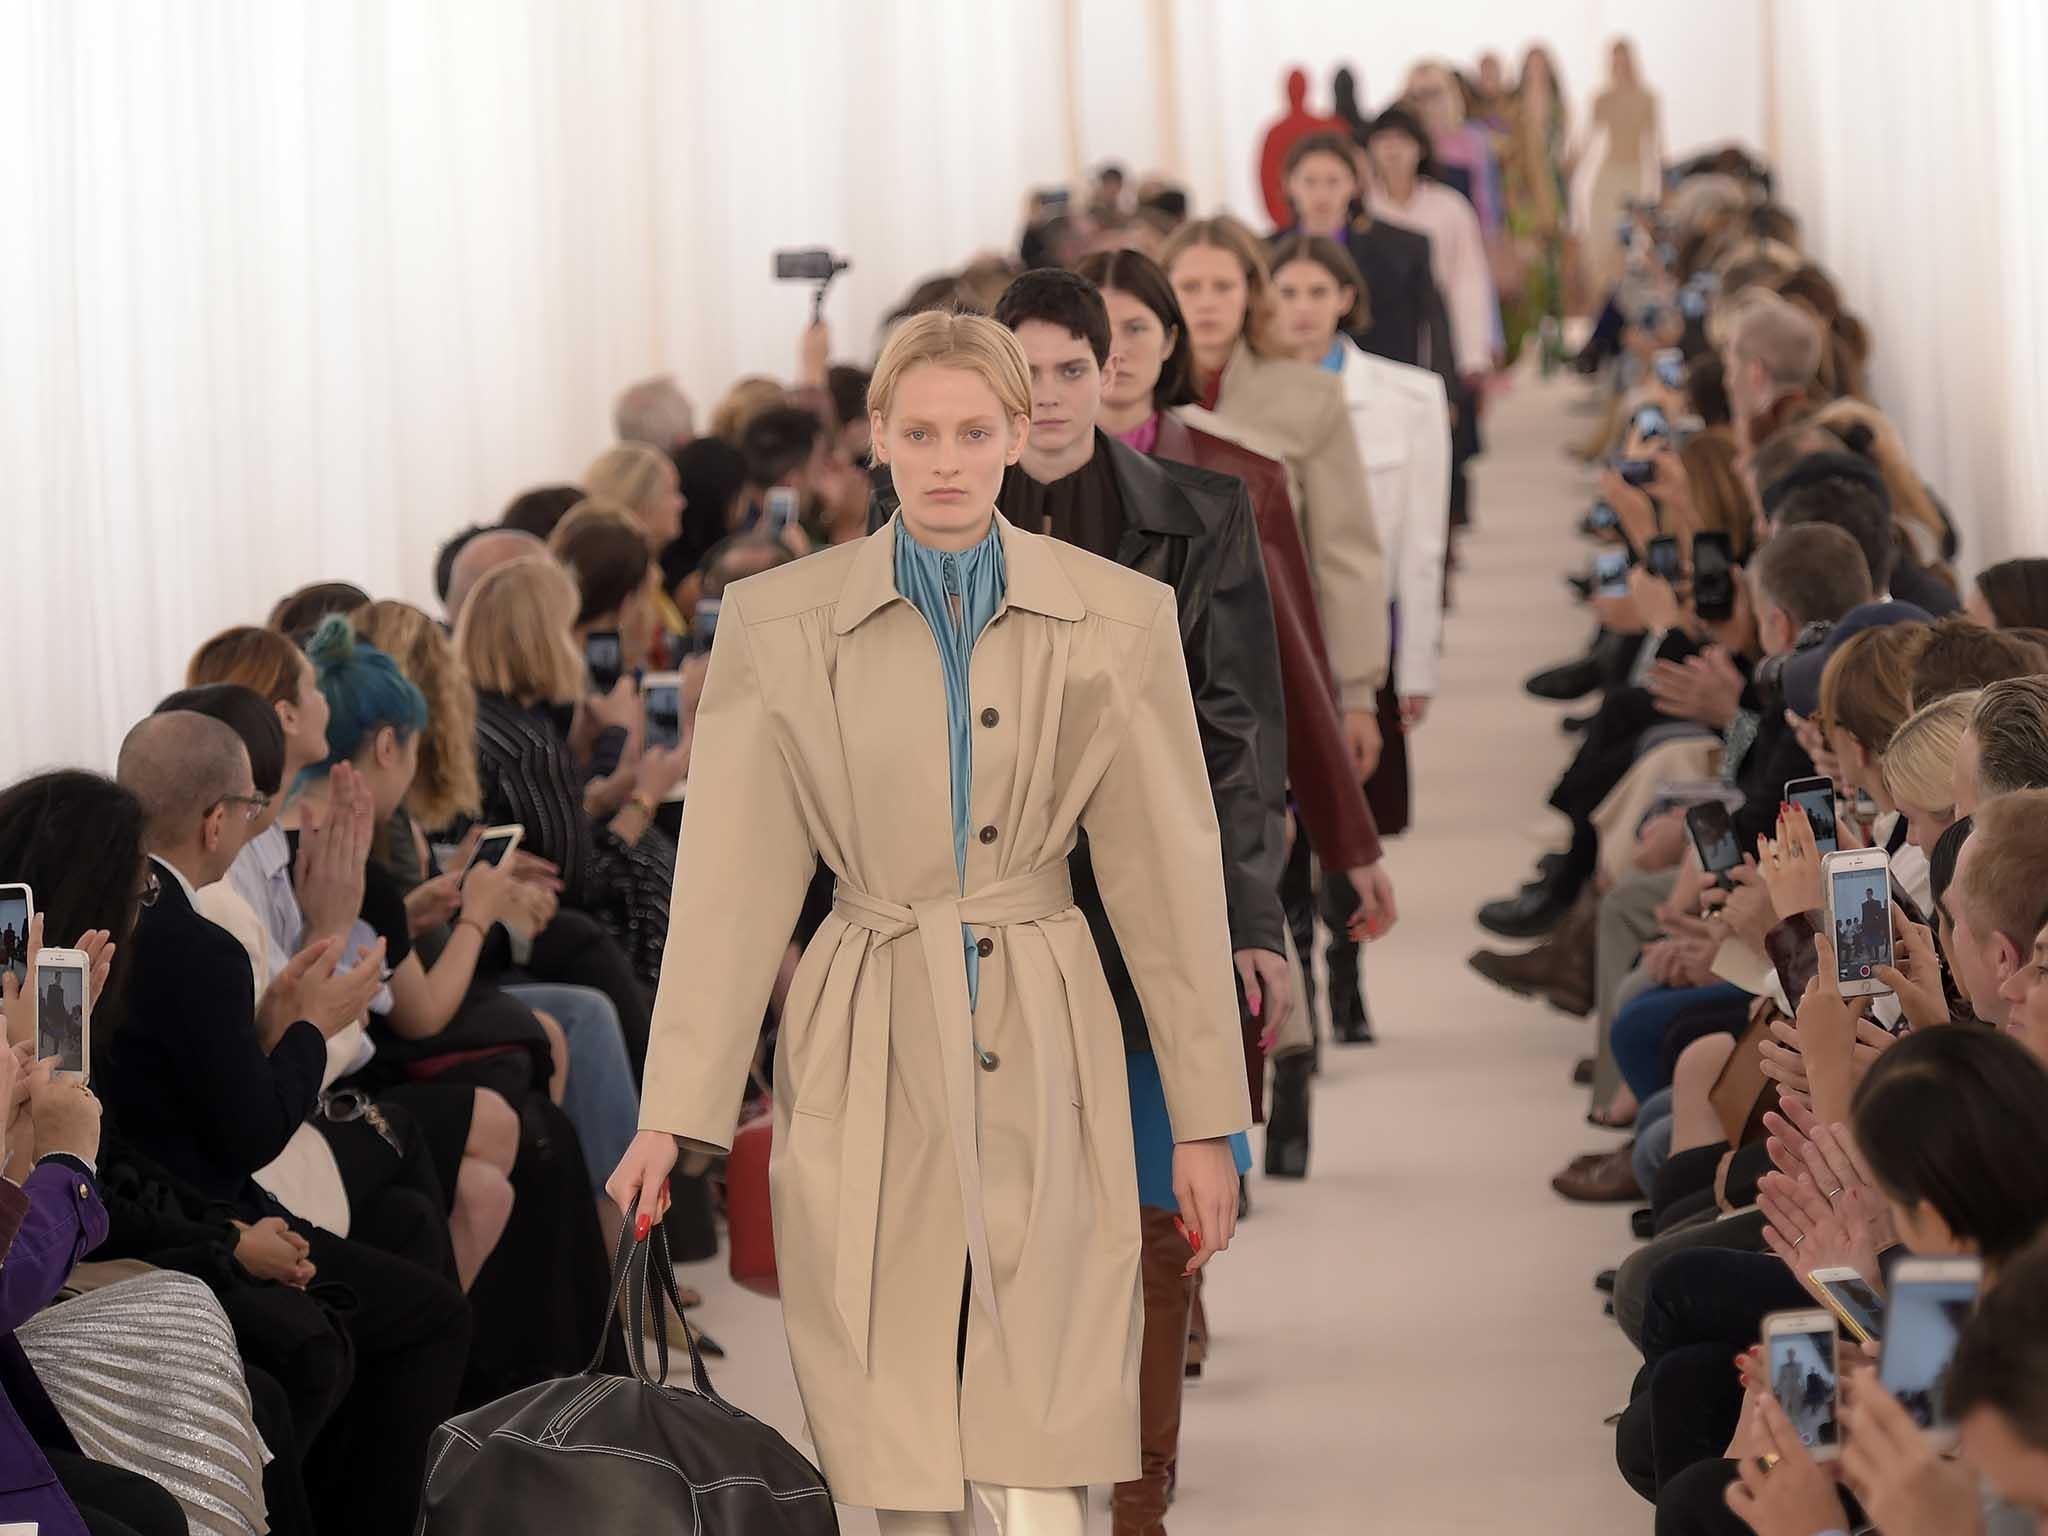 Balenciaga has sent a written apology to the agencies of the models who were affected